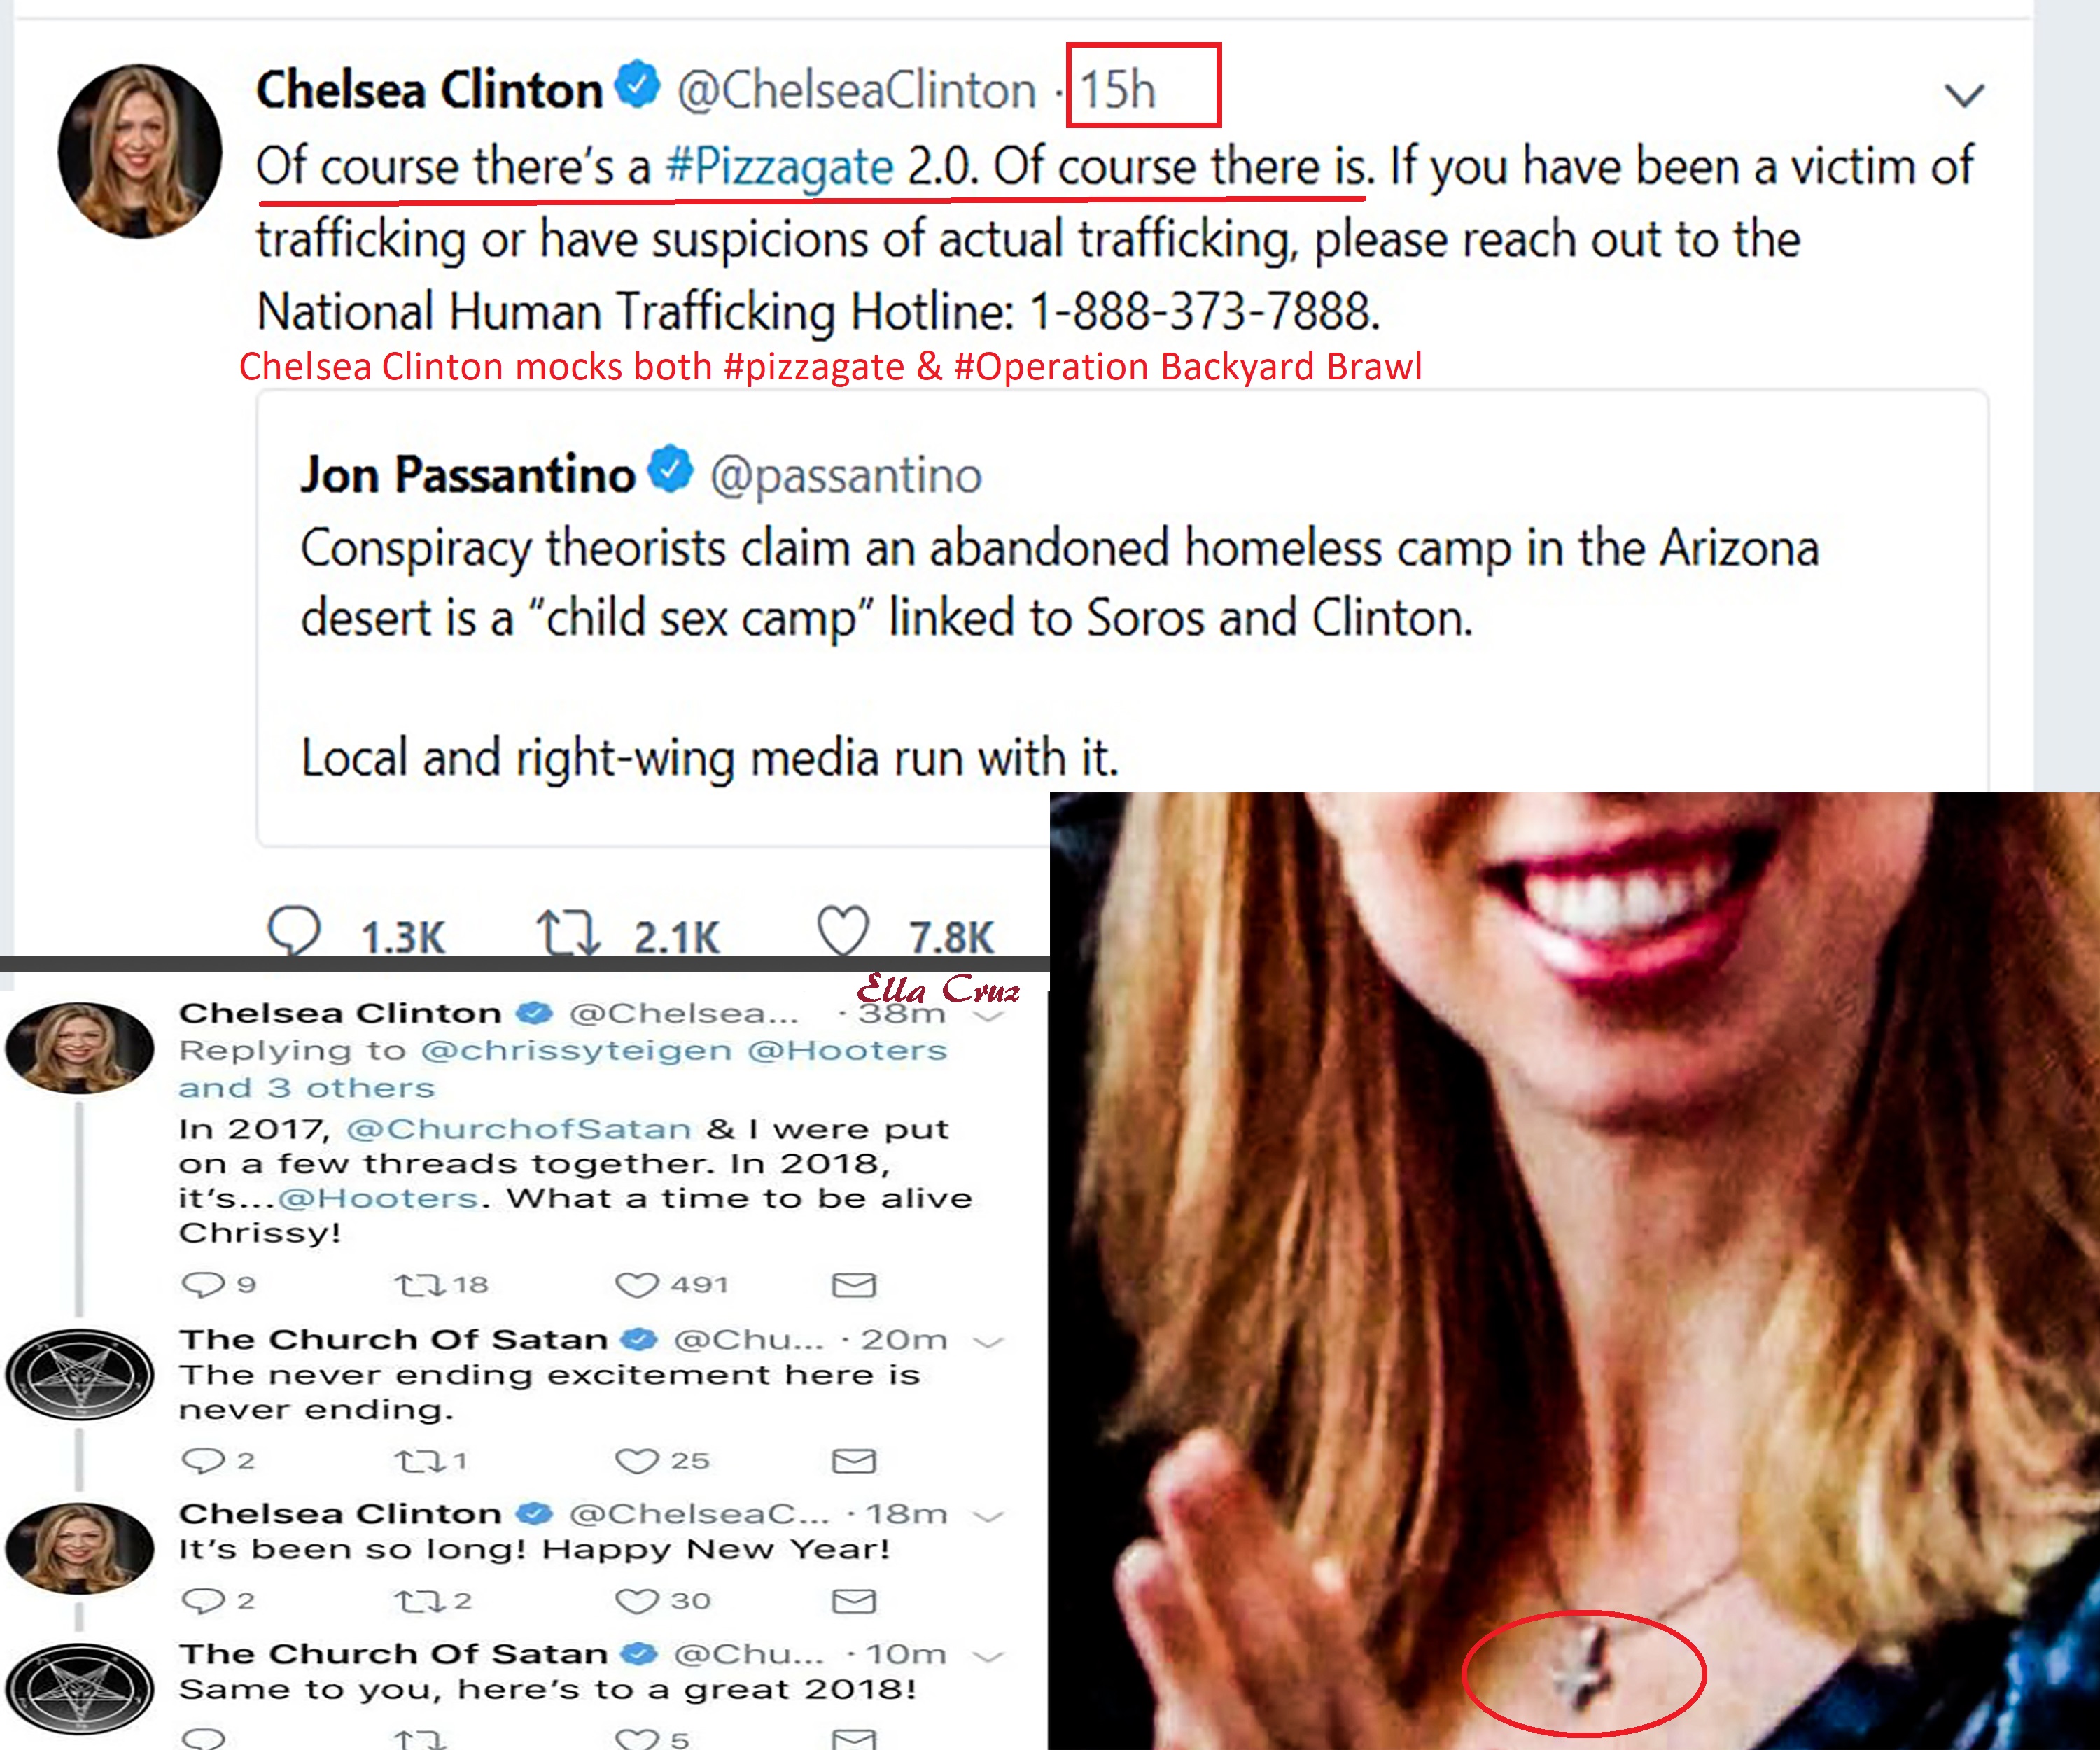 Chelsea Clinton Loses No Time To Defend Her Pals & Mock The #OperationBackyardBrawl As a Conspiracy